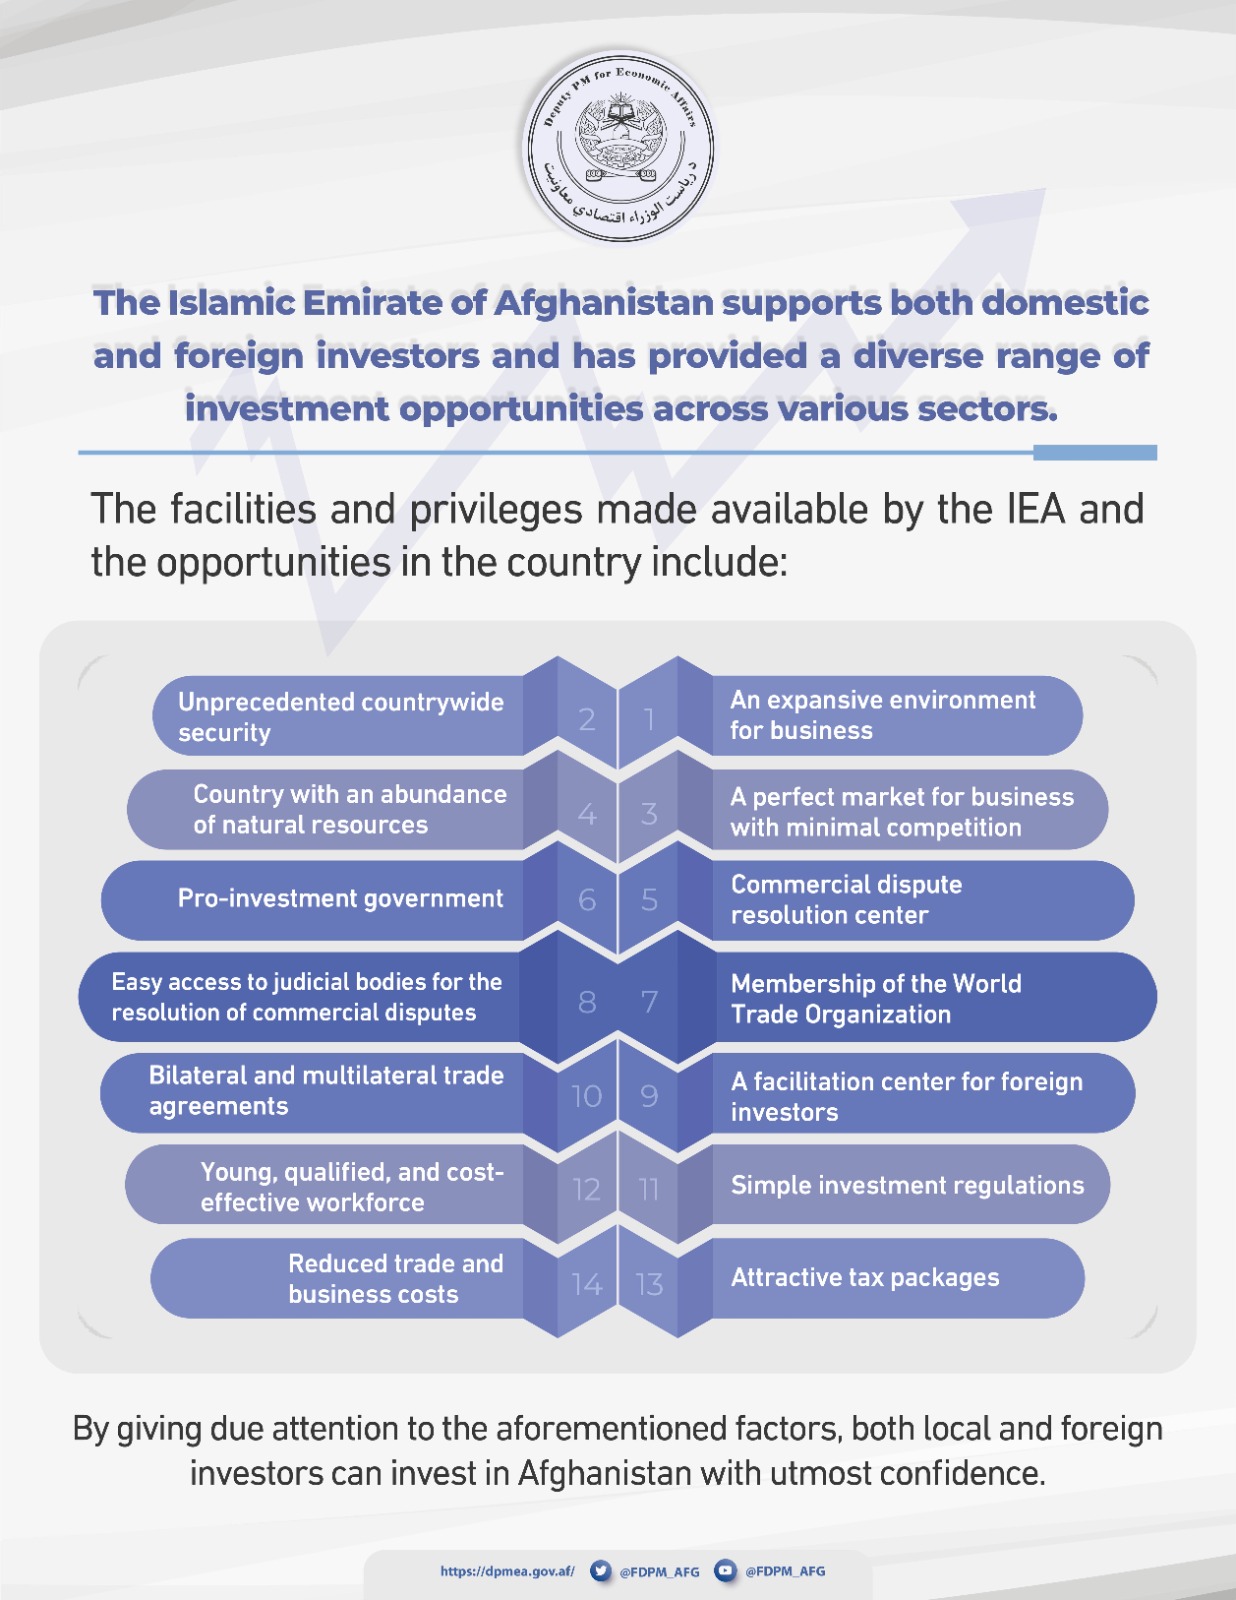 The infographic below shows the facilities, privileges, and opportunities provided by the Islamic Emirate of Afghanistan for investment: